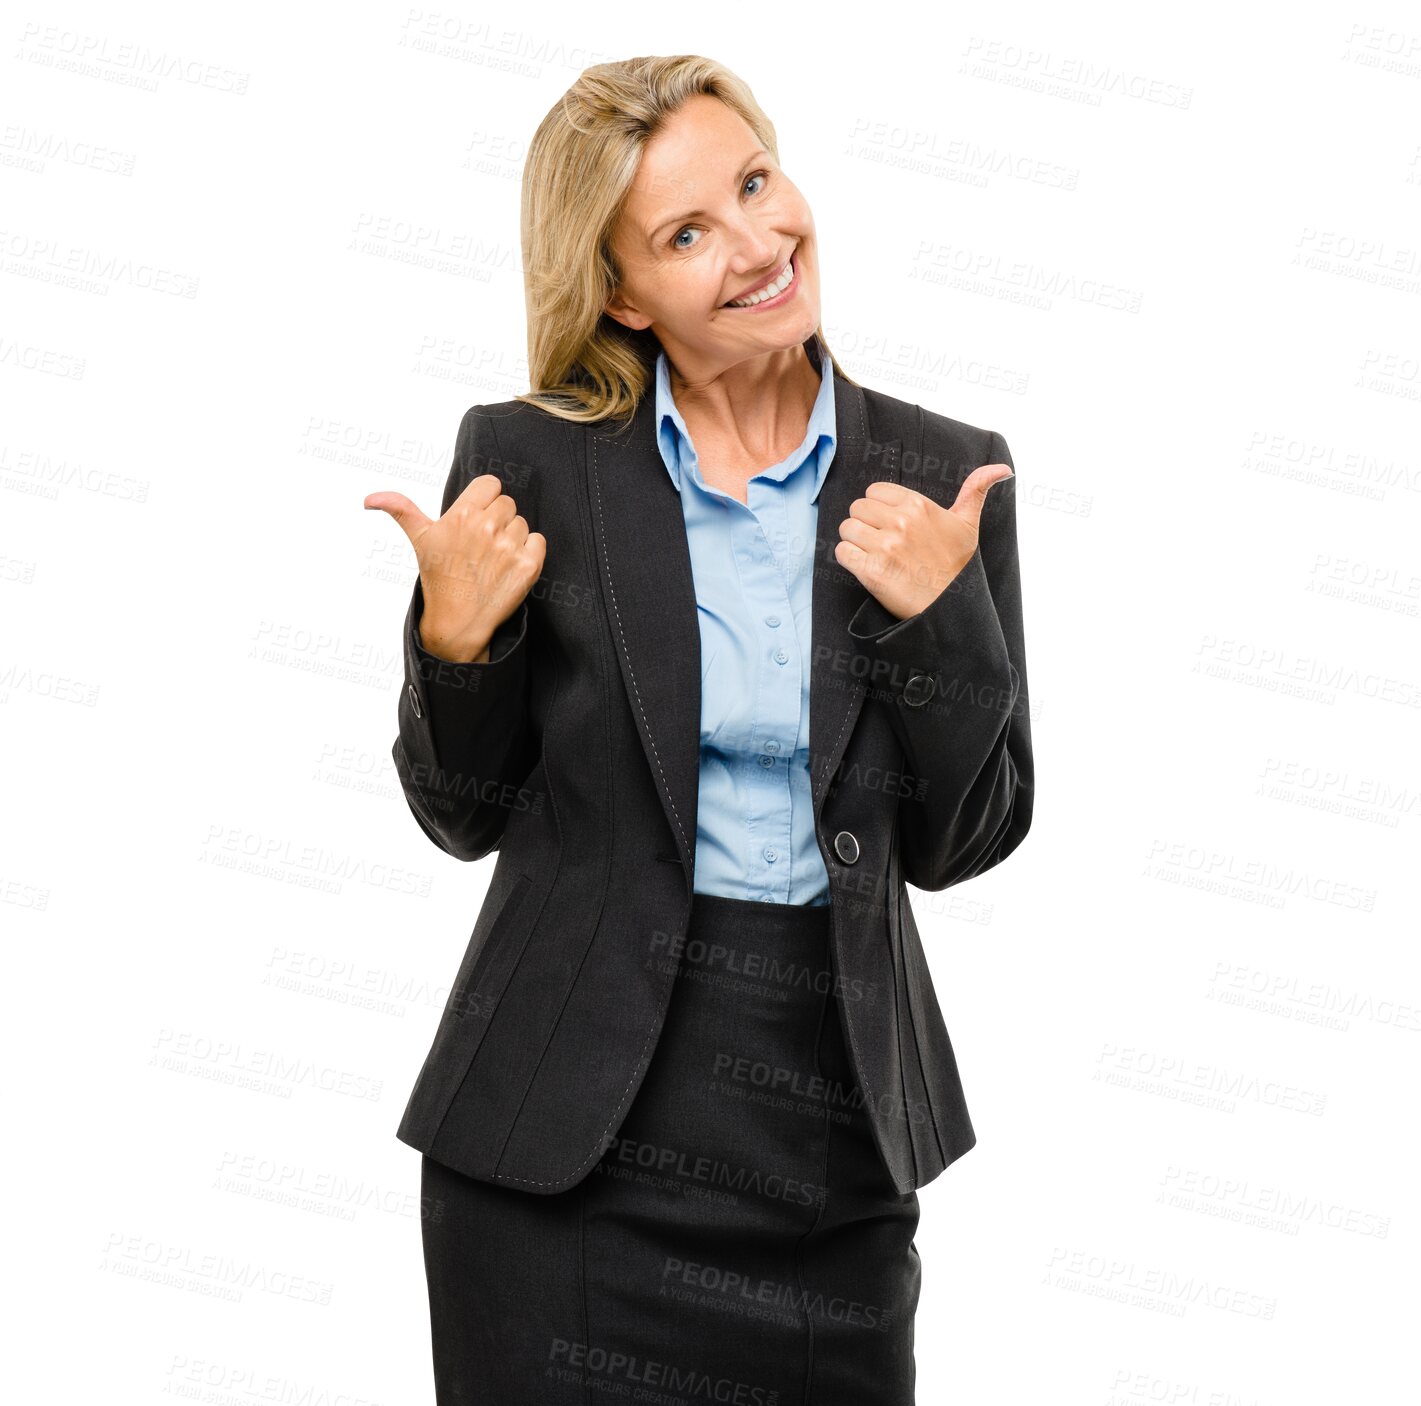 Buy stock photo Happy, thumbs up and portrait of business woman with good news, approval and agreement. Excited, smile and professional female person with satisfaction hand gesture by transparent png background.